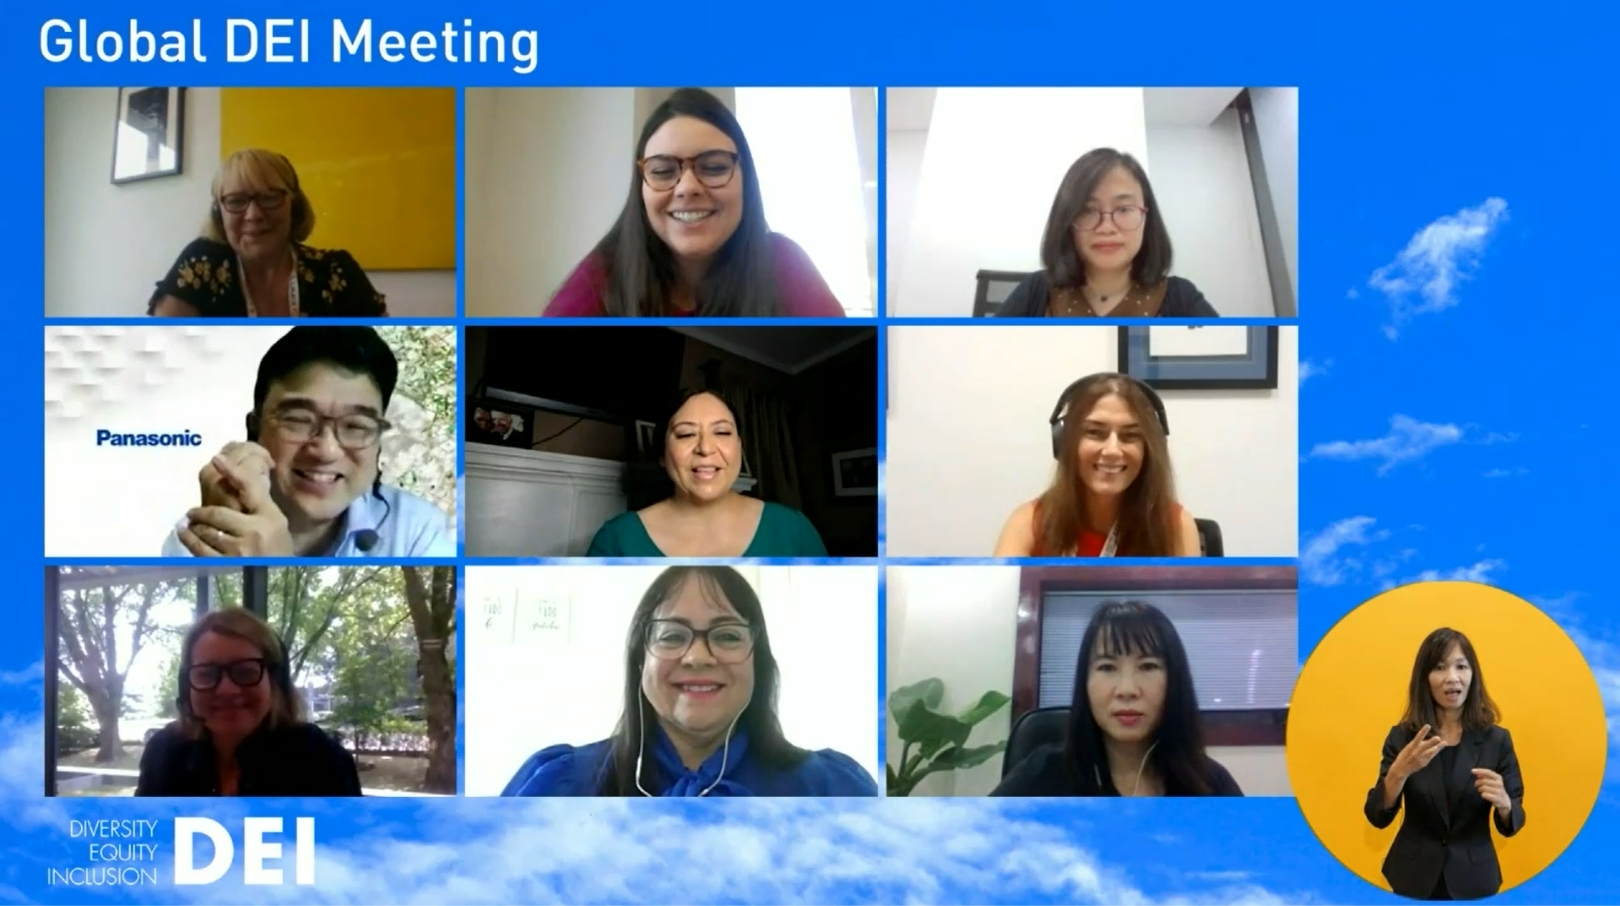 Photo: Nine employees from around the world exchange opinions online at a session of the Global DEI Meeting. In the lower right of the screen, a woman is providing simultaneous interpretation in sign language.